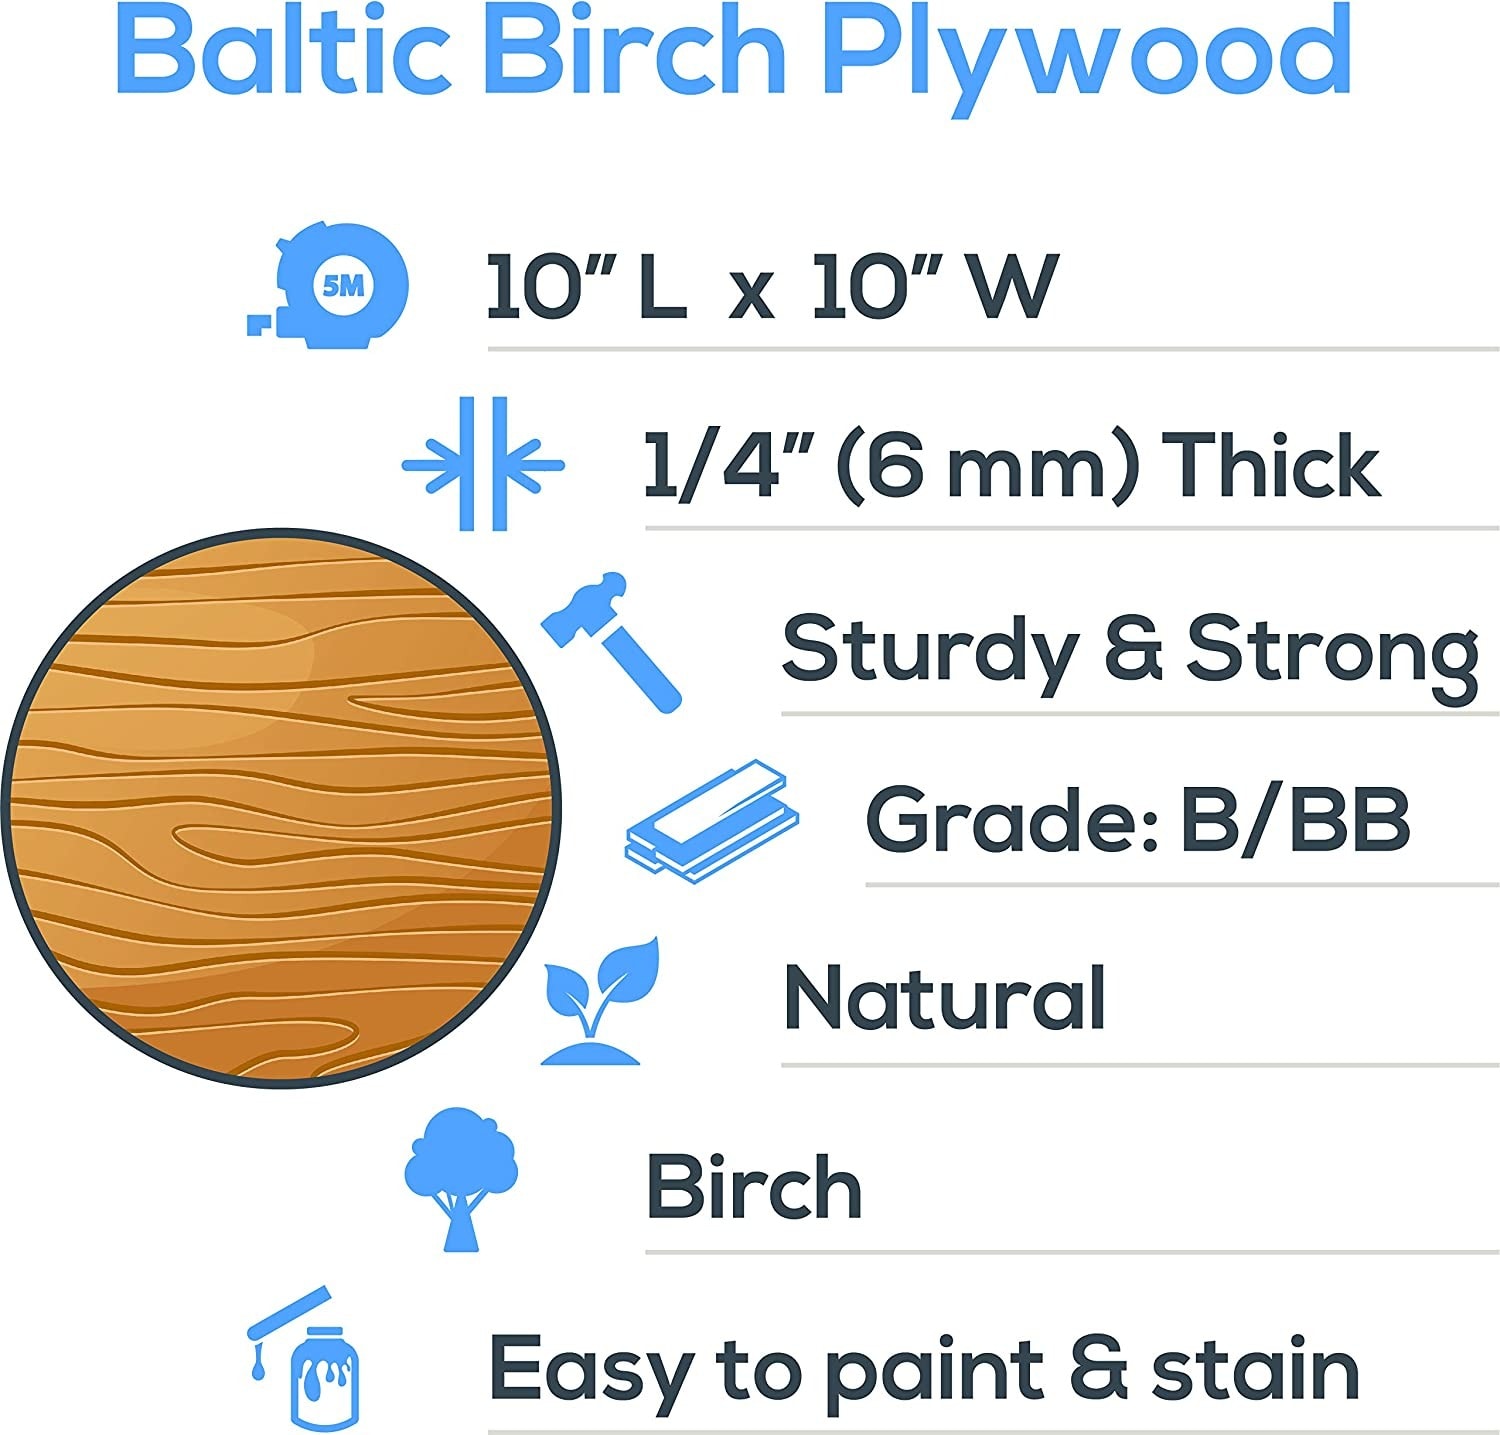 1/8 (3mm) 16 x 16 Baltic Birch Sheets – The Blank Wooden Canvas